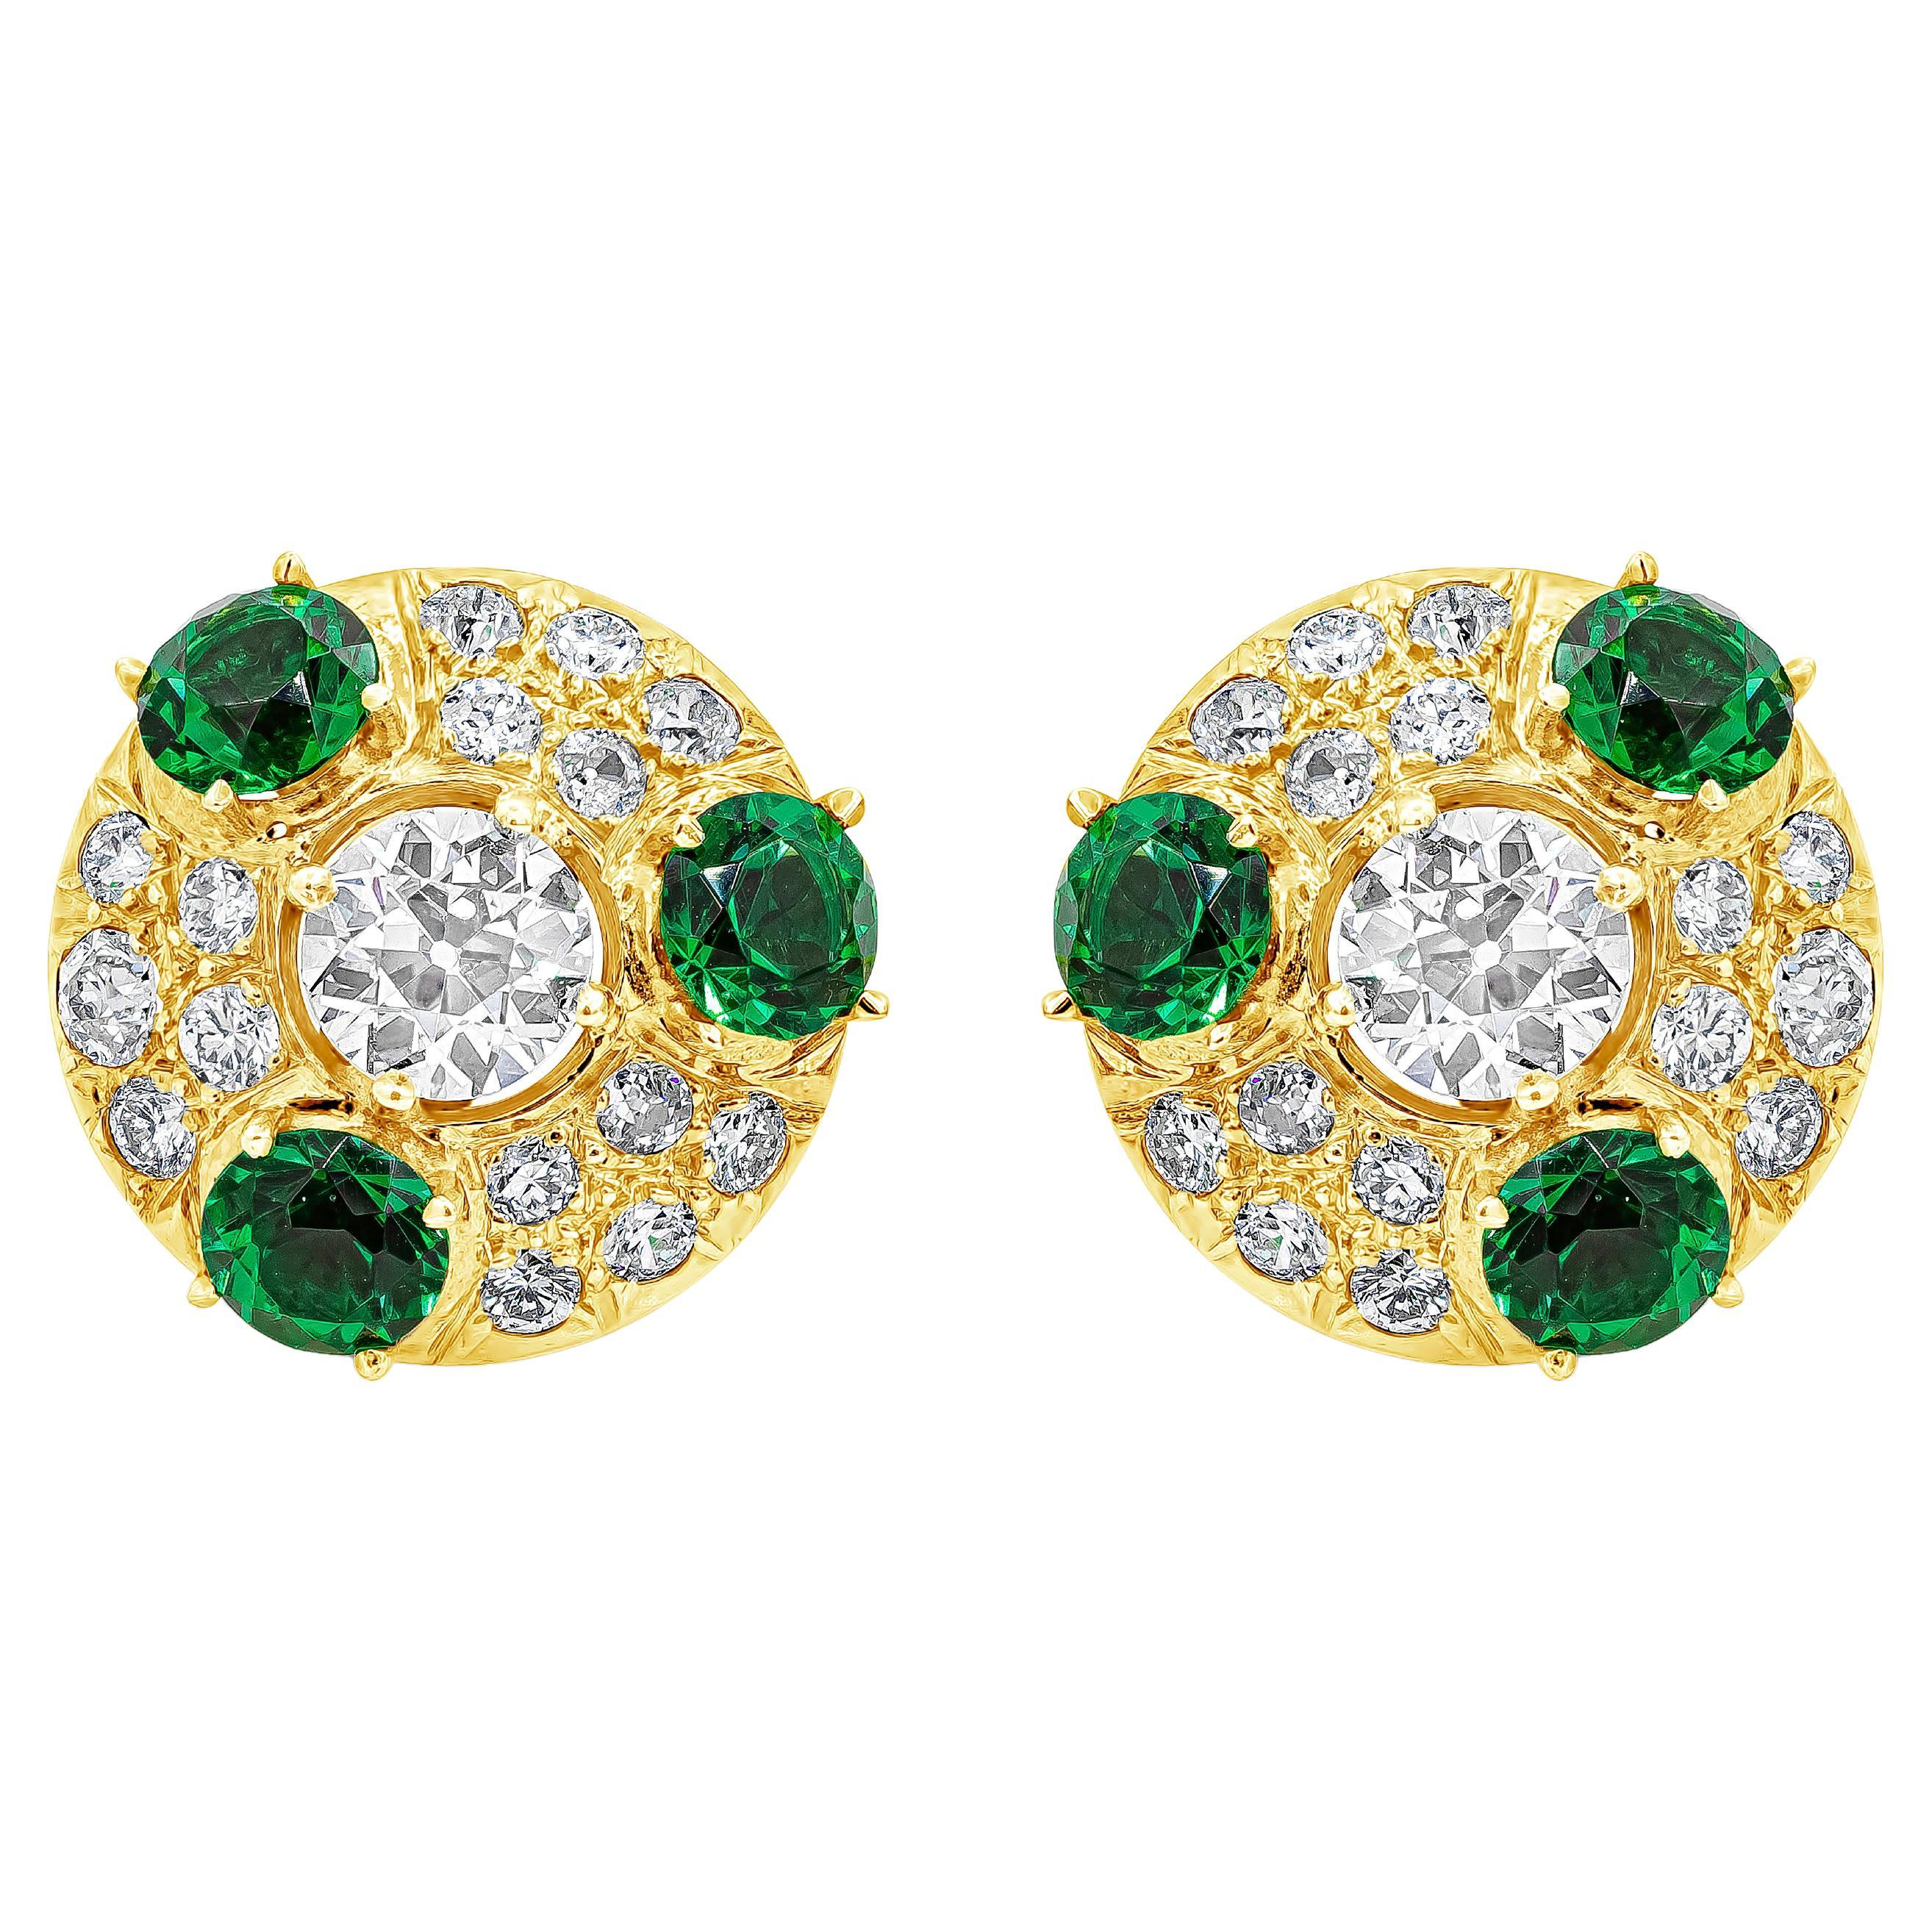 3.15 Carats Total Old European Cut Diamonds with Imitation Emerald Clip Earrings